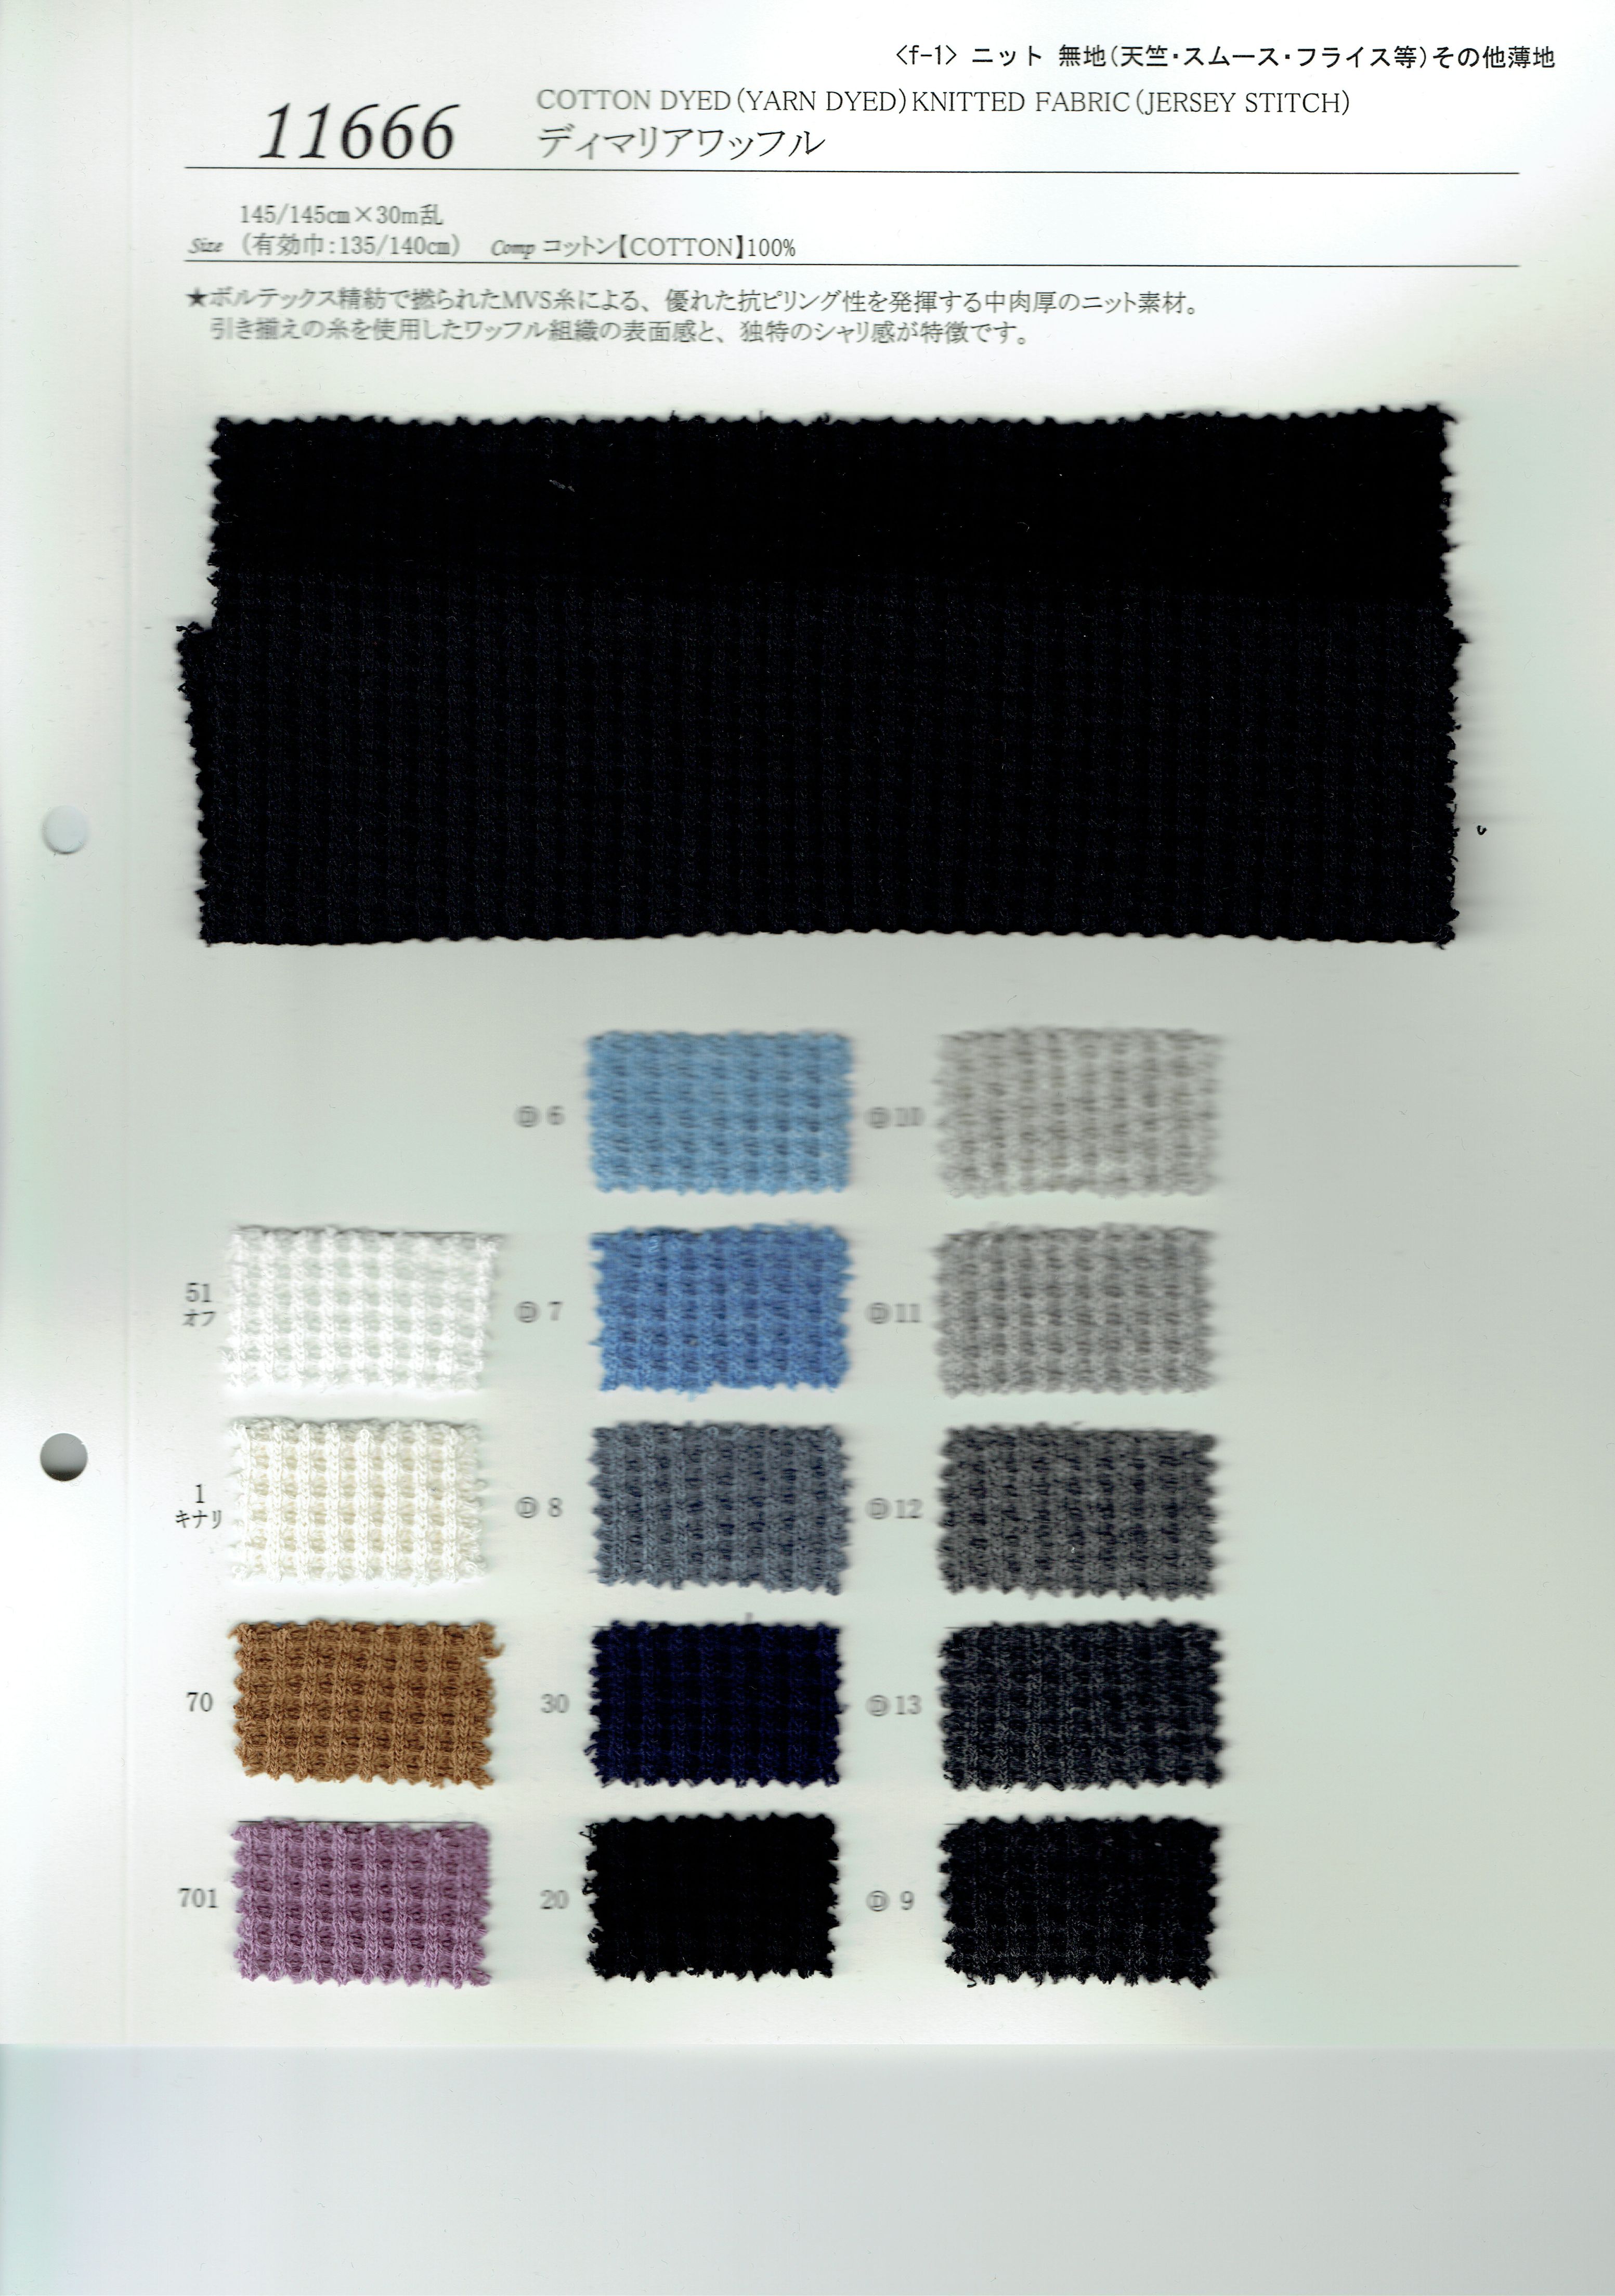 View COTTON100 DYED[YARN DYED]KNITTED FABRIC[JERSEY STITCH] DYED[YARN DYED]KNITTED FABRIC[JERSEY STITCH]